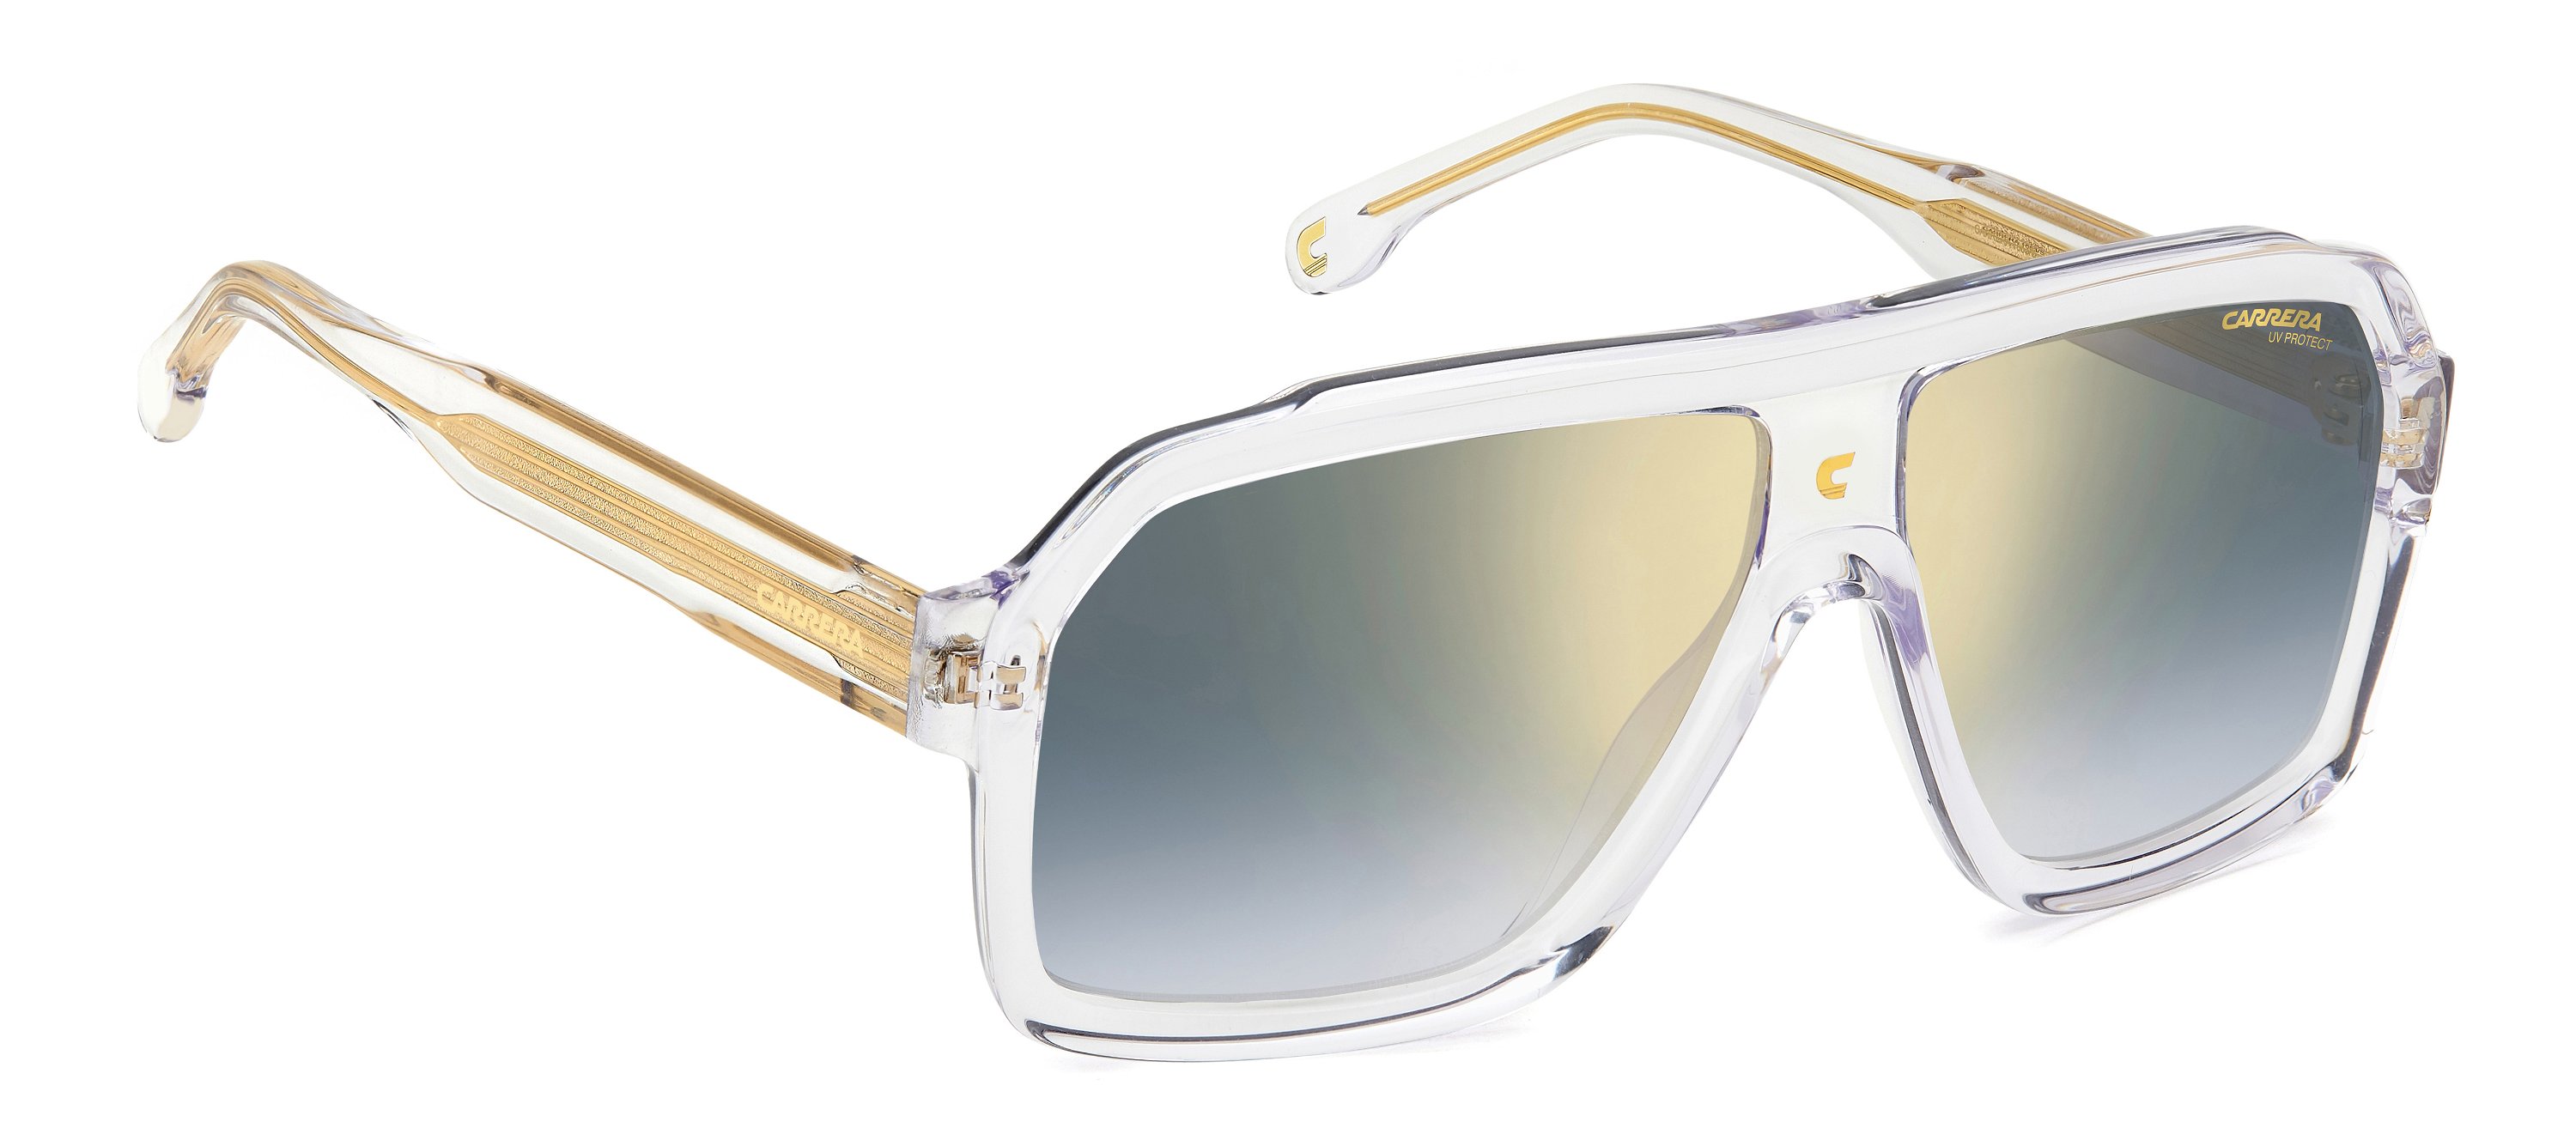 Carrera Sonnenbrille 1053/S 900 crystal